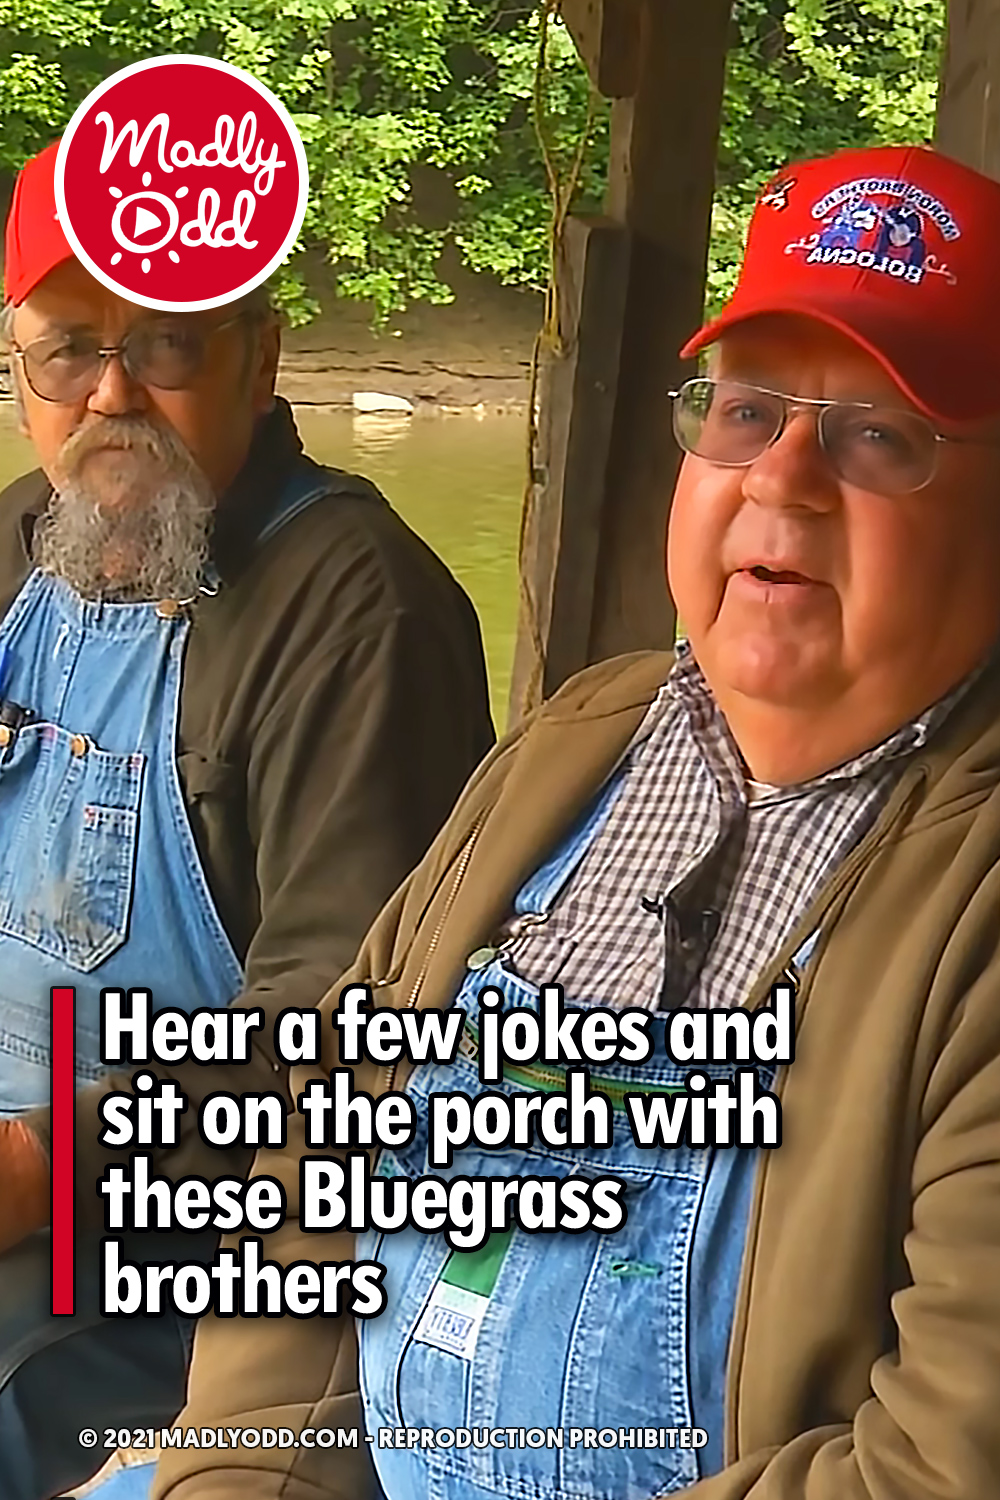 Hear a few jokes and sit on the porch with these Bluegrass brothers